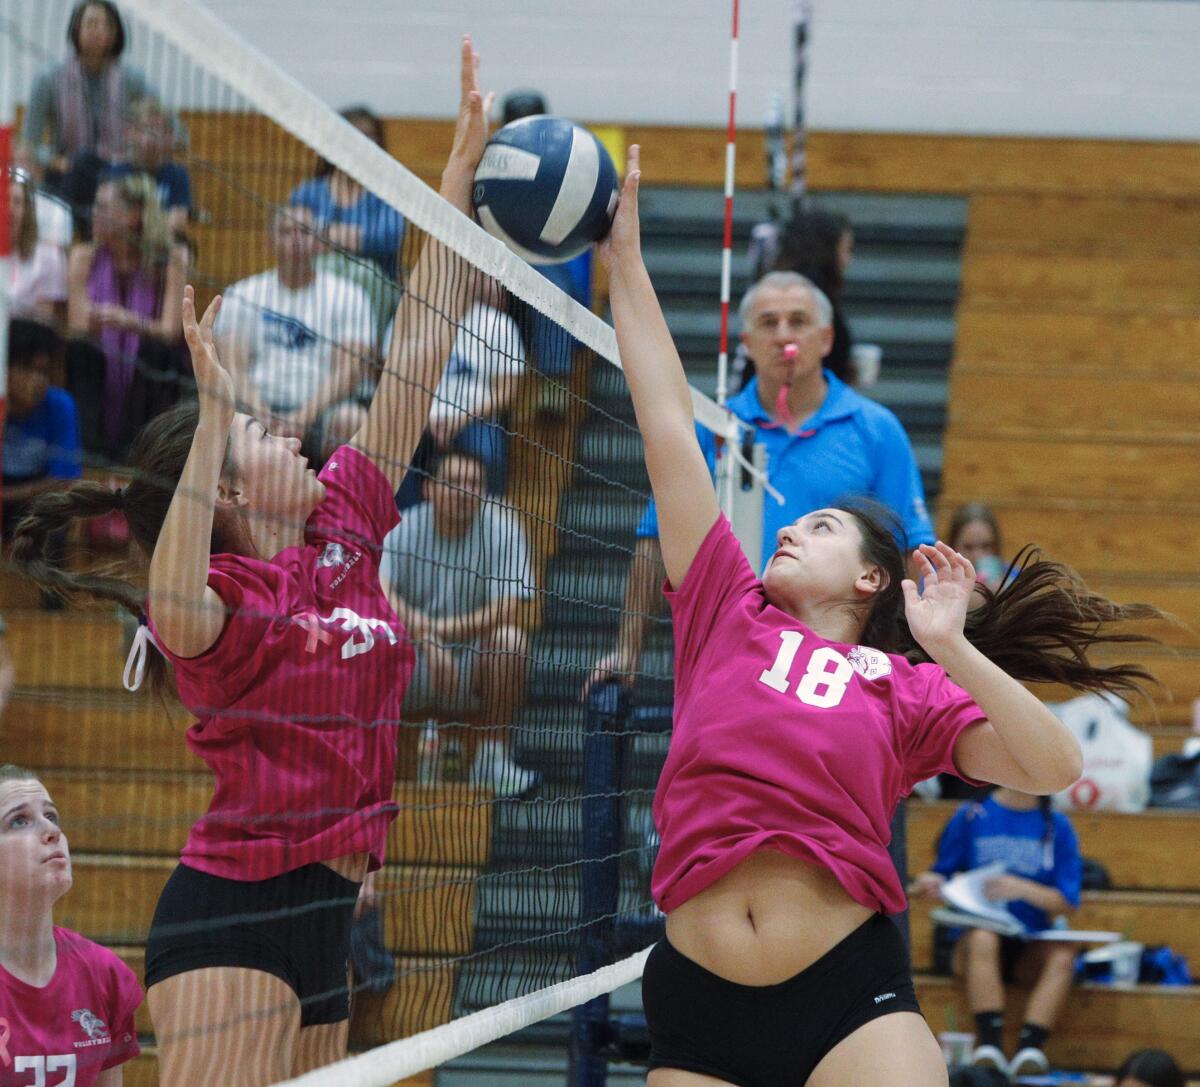 Burbank's Ashley Eskander and Crescenta Valley's Emma Glaza battle at the top of the net for the point in a Pacific League girls' volleyball match at Crescenta Valley High School on Thursday, October 10, 2019.in a Pacific League girls' volleyball match at Crescenta Valley High School on Thursday, October 10, 2019. Both teams wore the exact same color pink jersey in honor of Breast Cancer Awareness month.